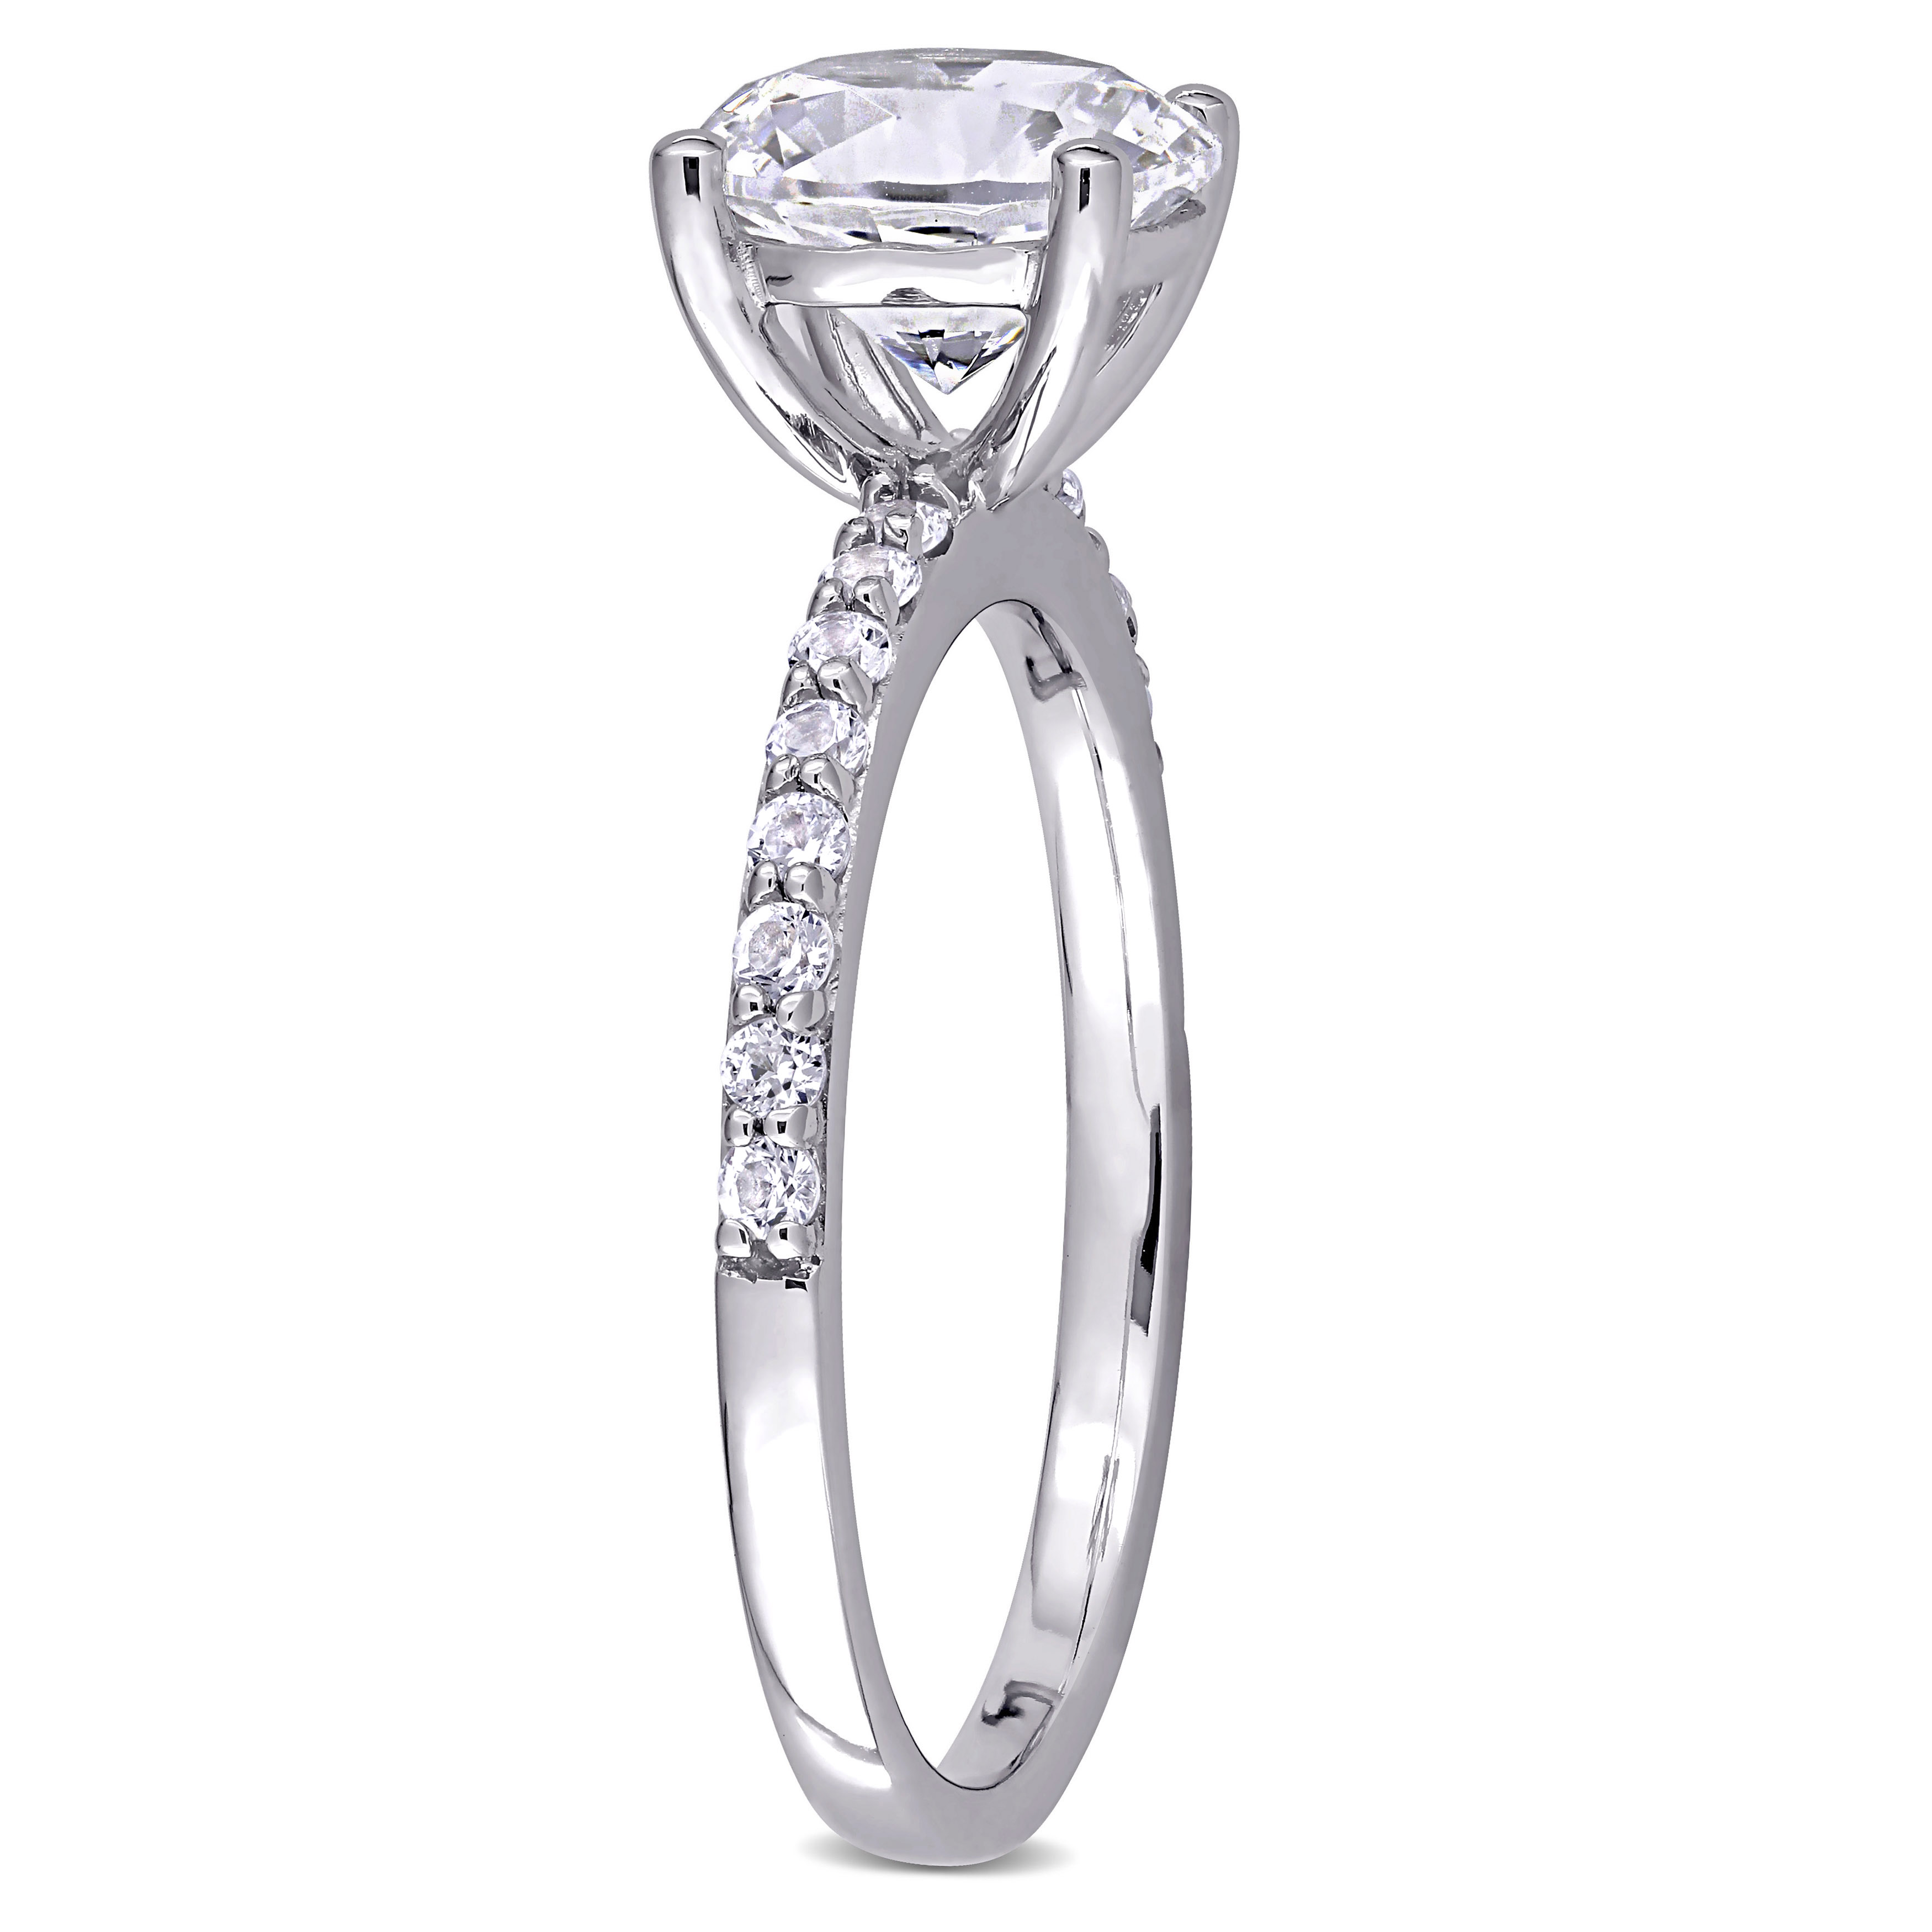 2 3/4 CT TGW Created White Sapphire Solitaire Ring in 10k White Gold